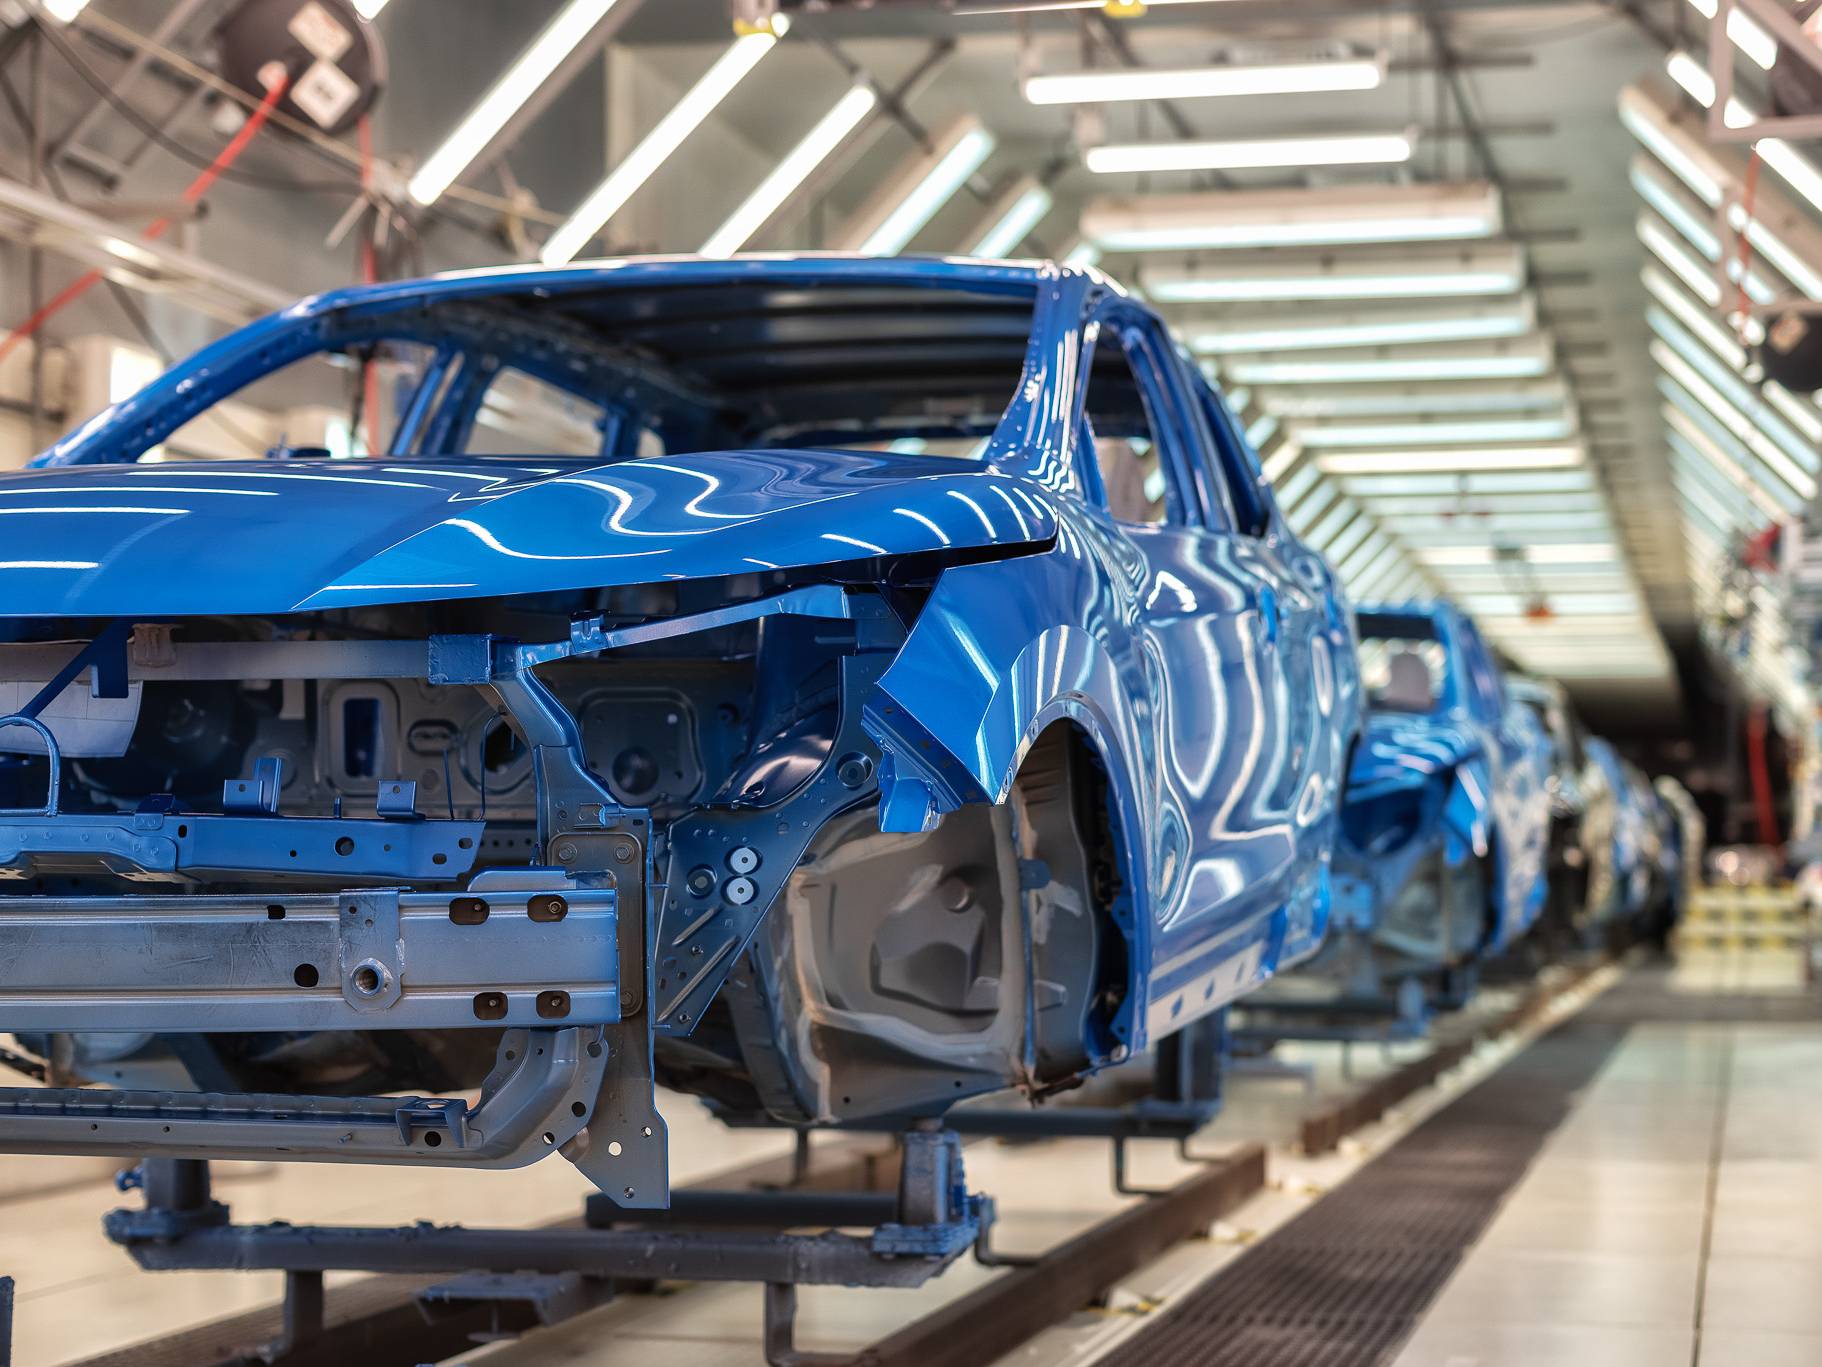 A row of blue car frames on an automotive assembly line in a well-lit factory setting.